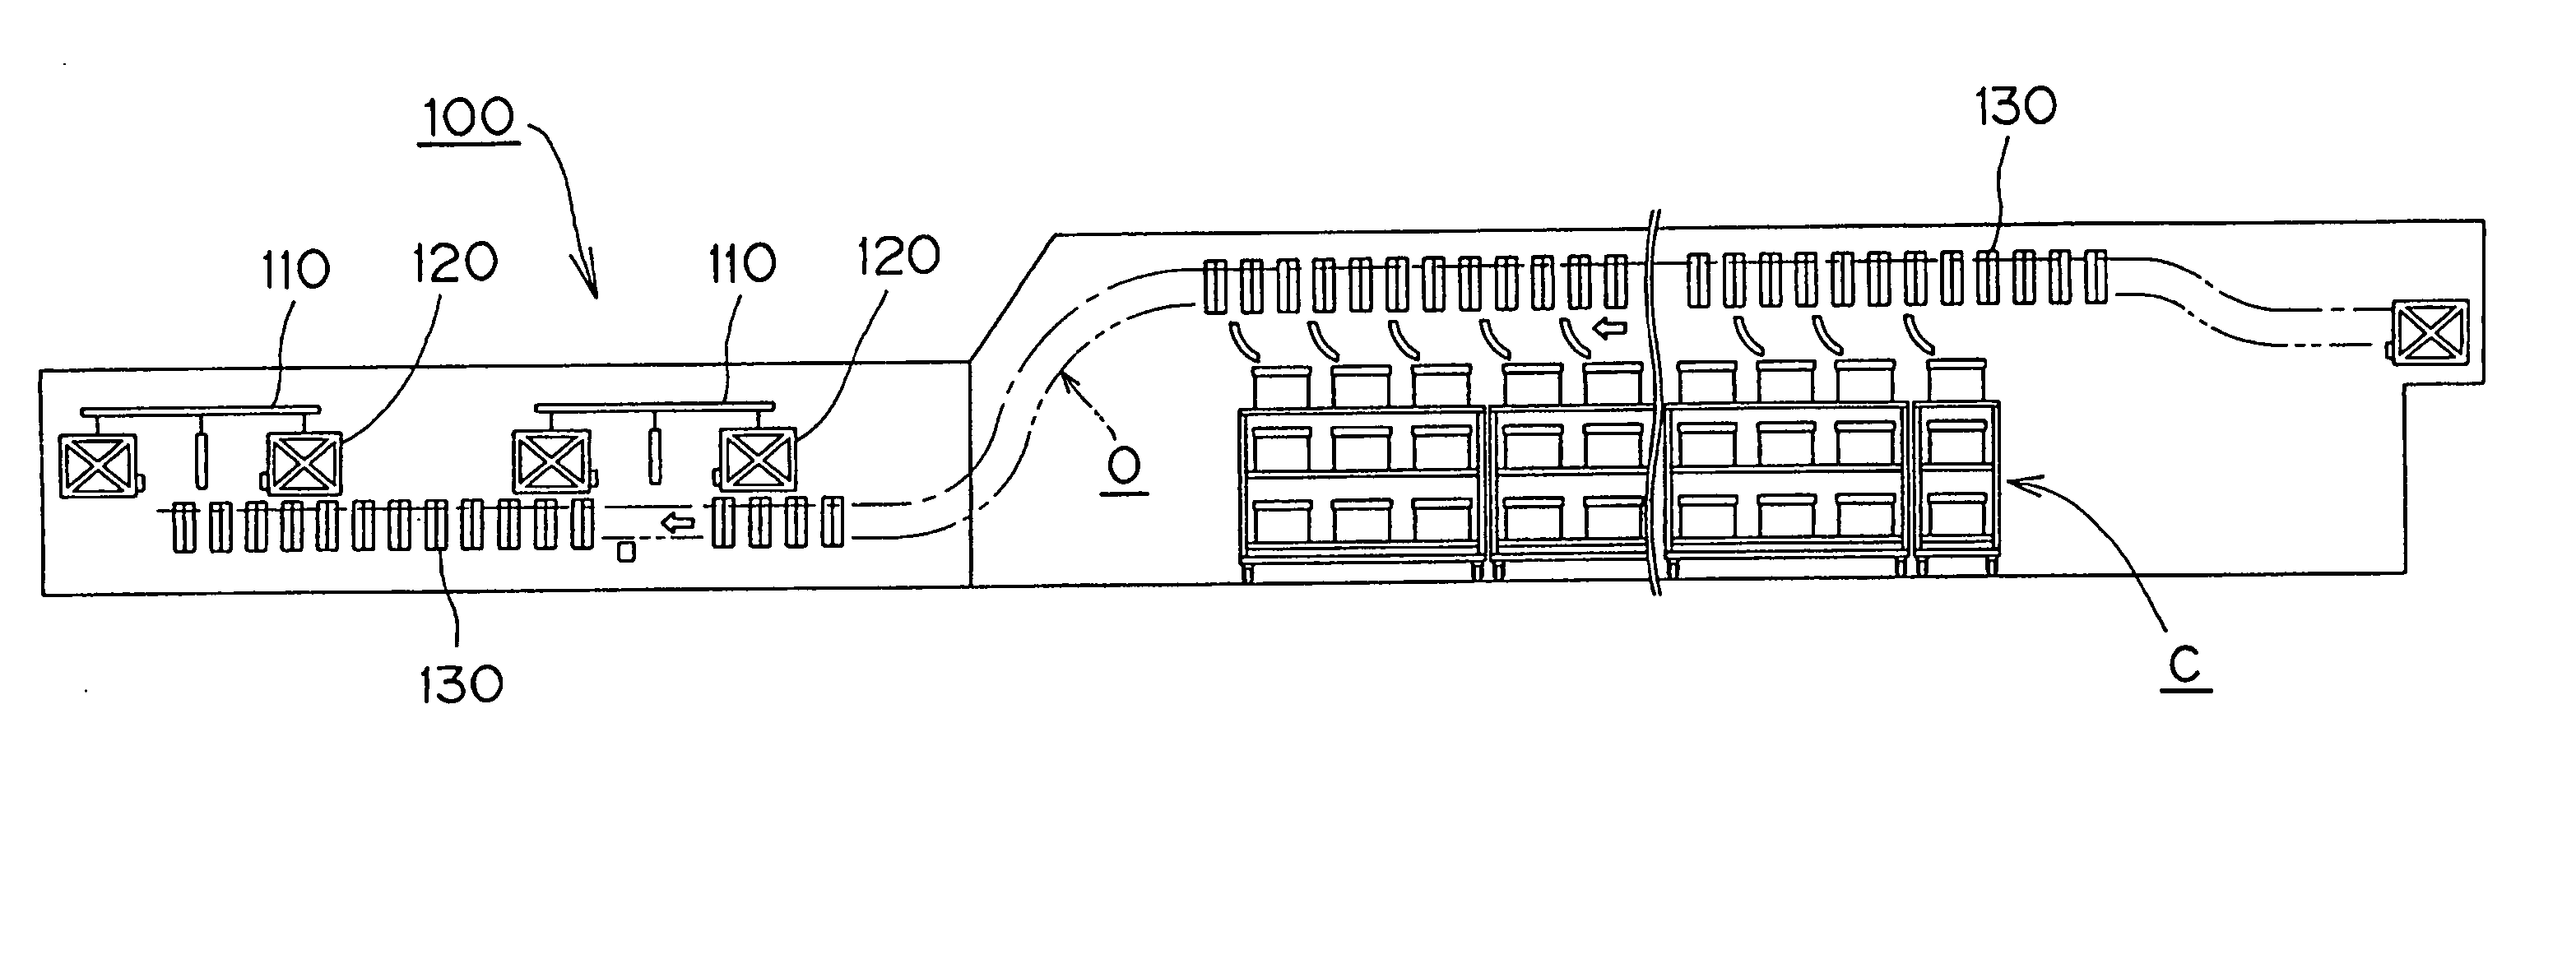 Mail sorting and distributing transfer system